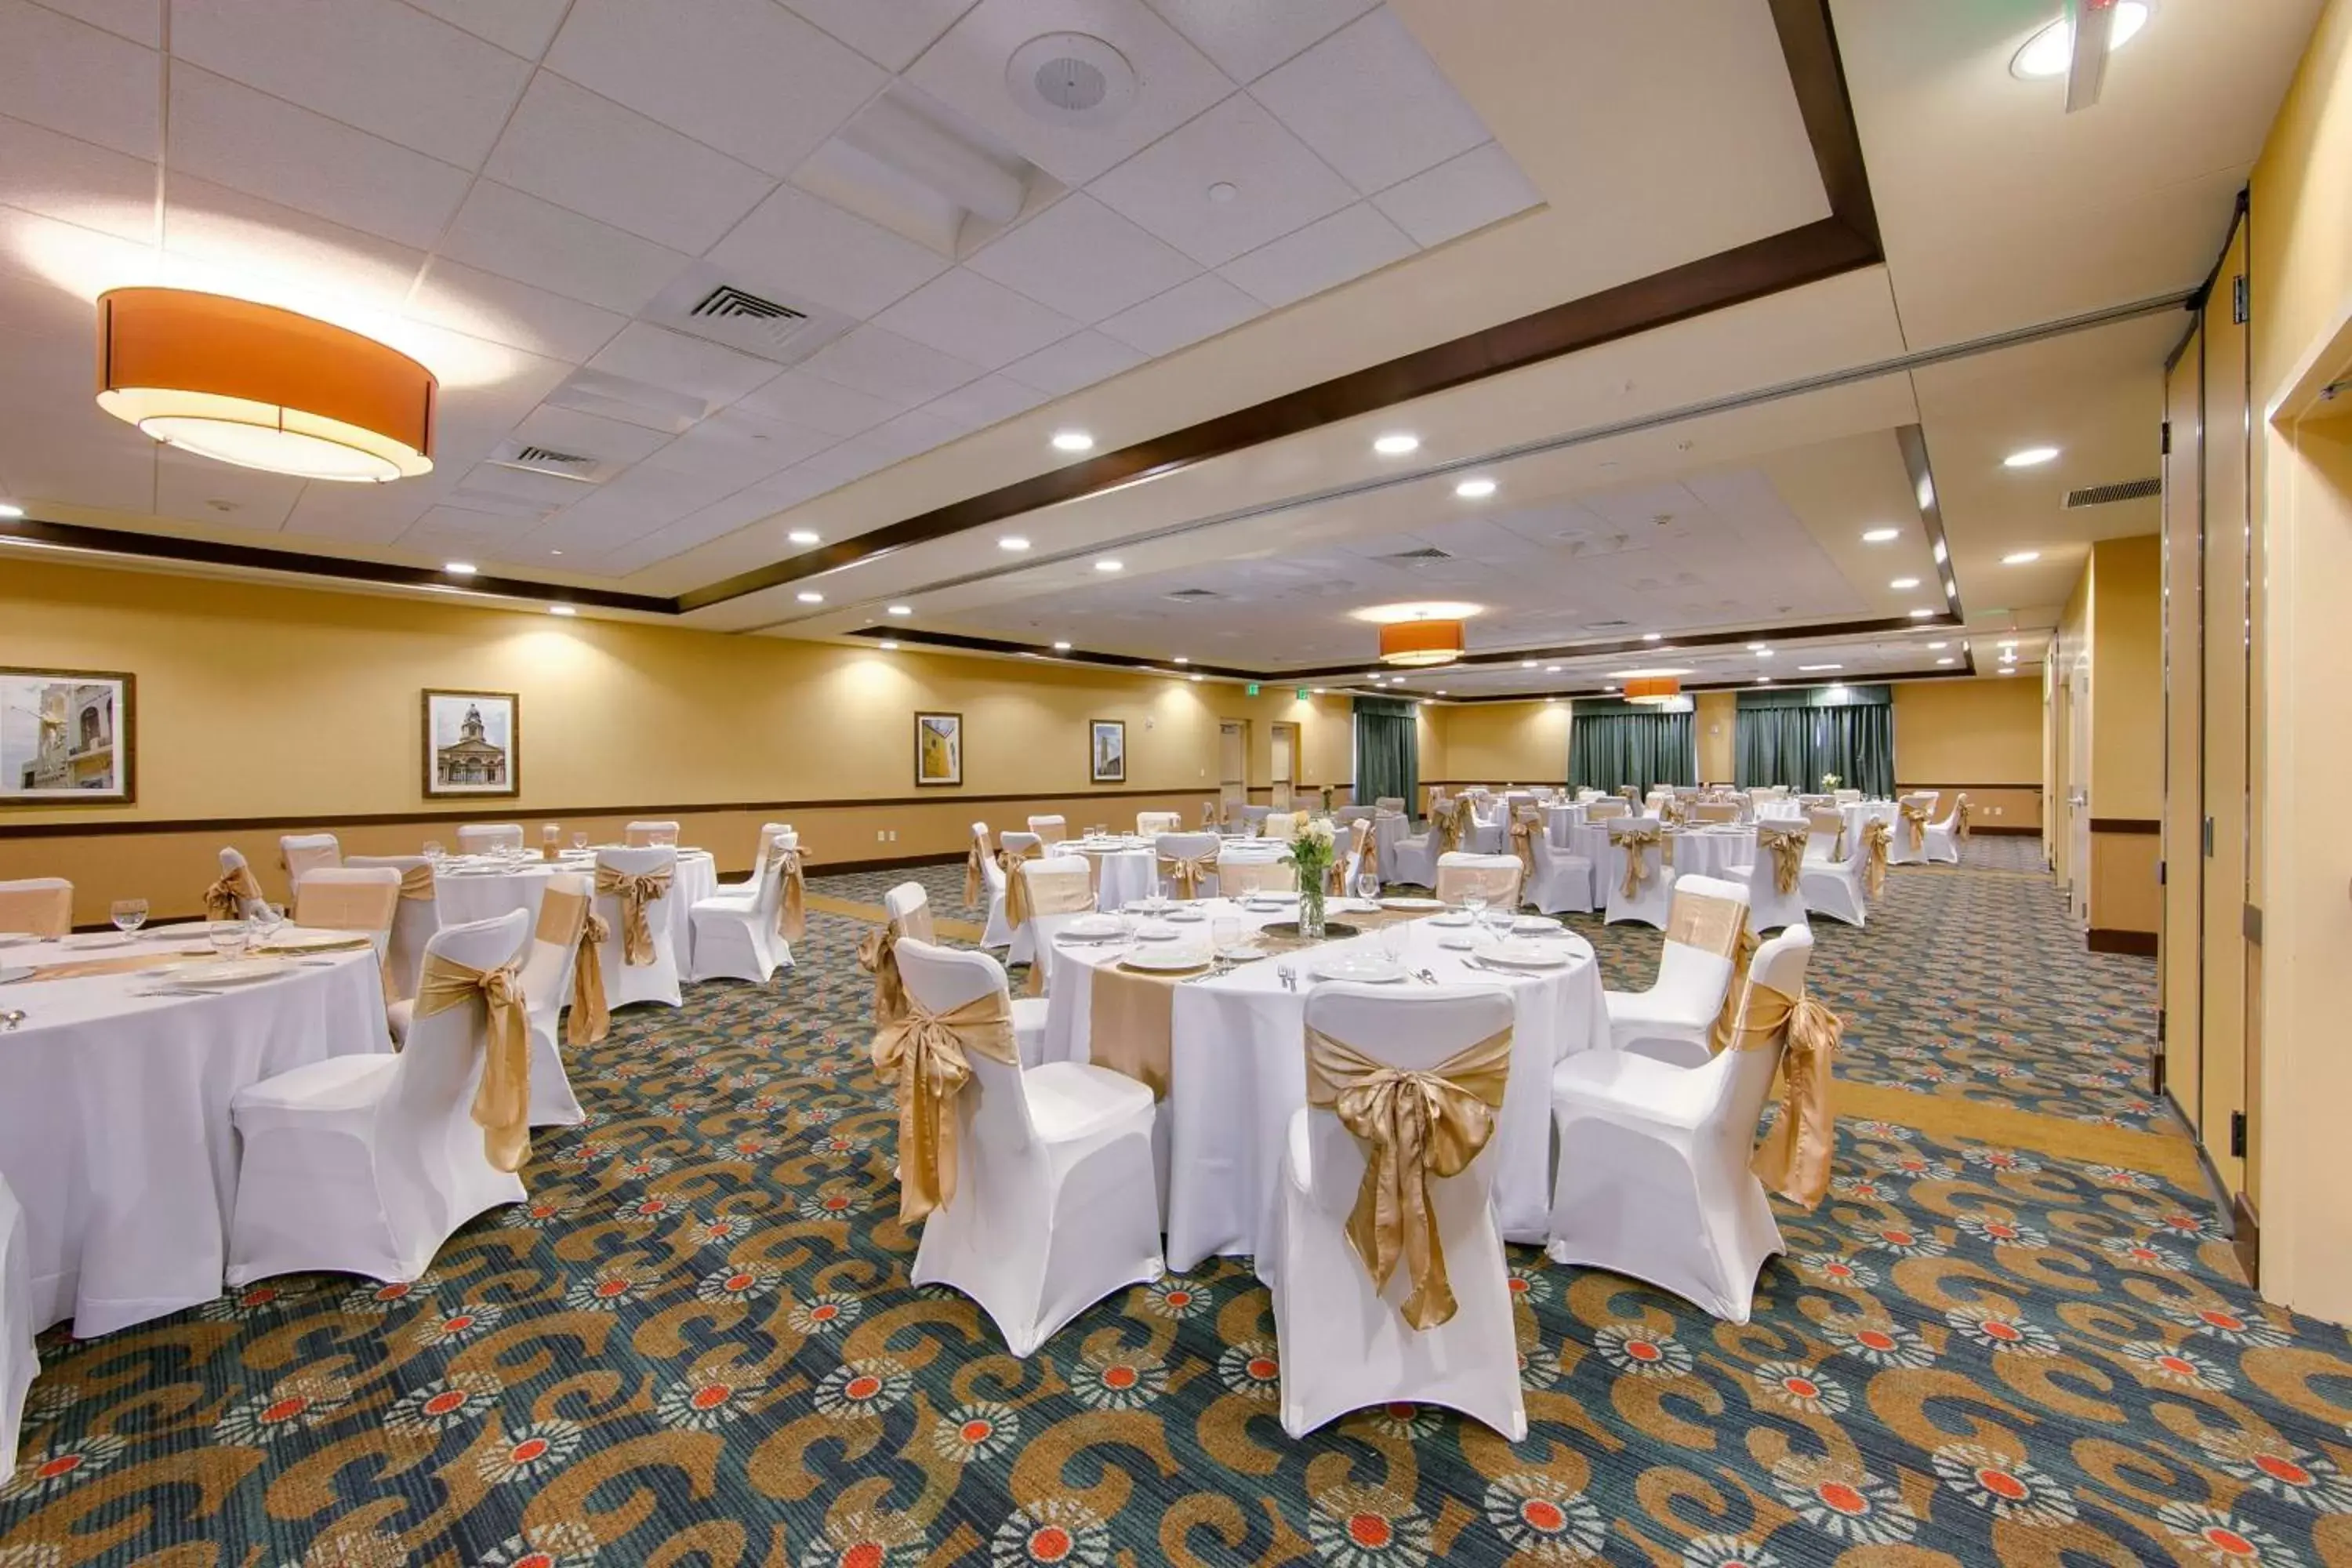 Meeting/conference room, Banquet Facilities in Hilton Garden Inn Fort Worth Medical Center